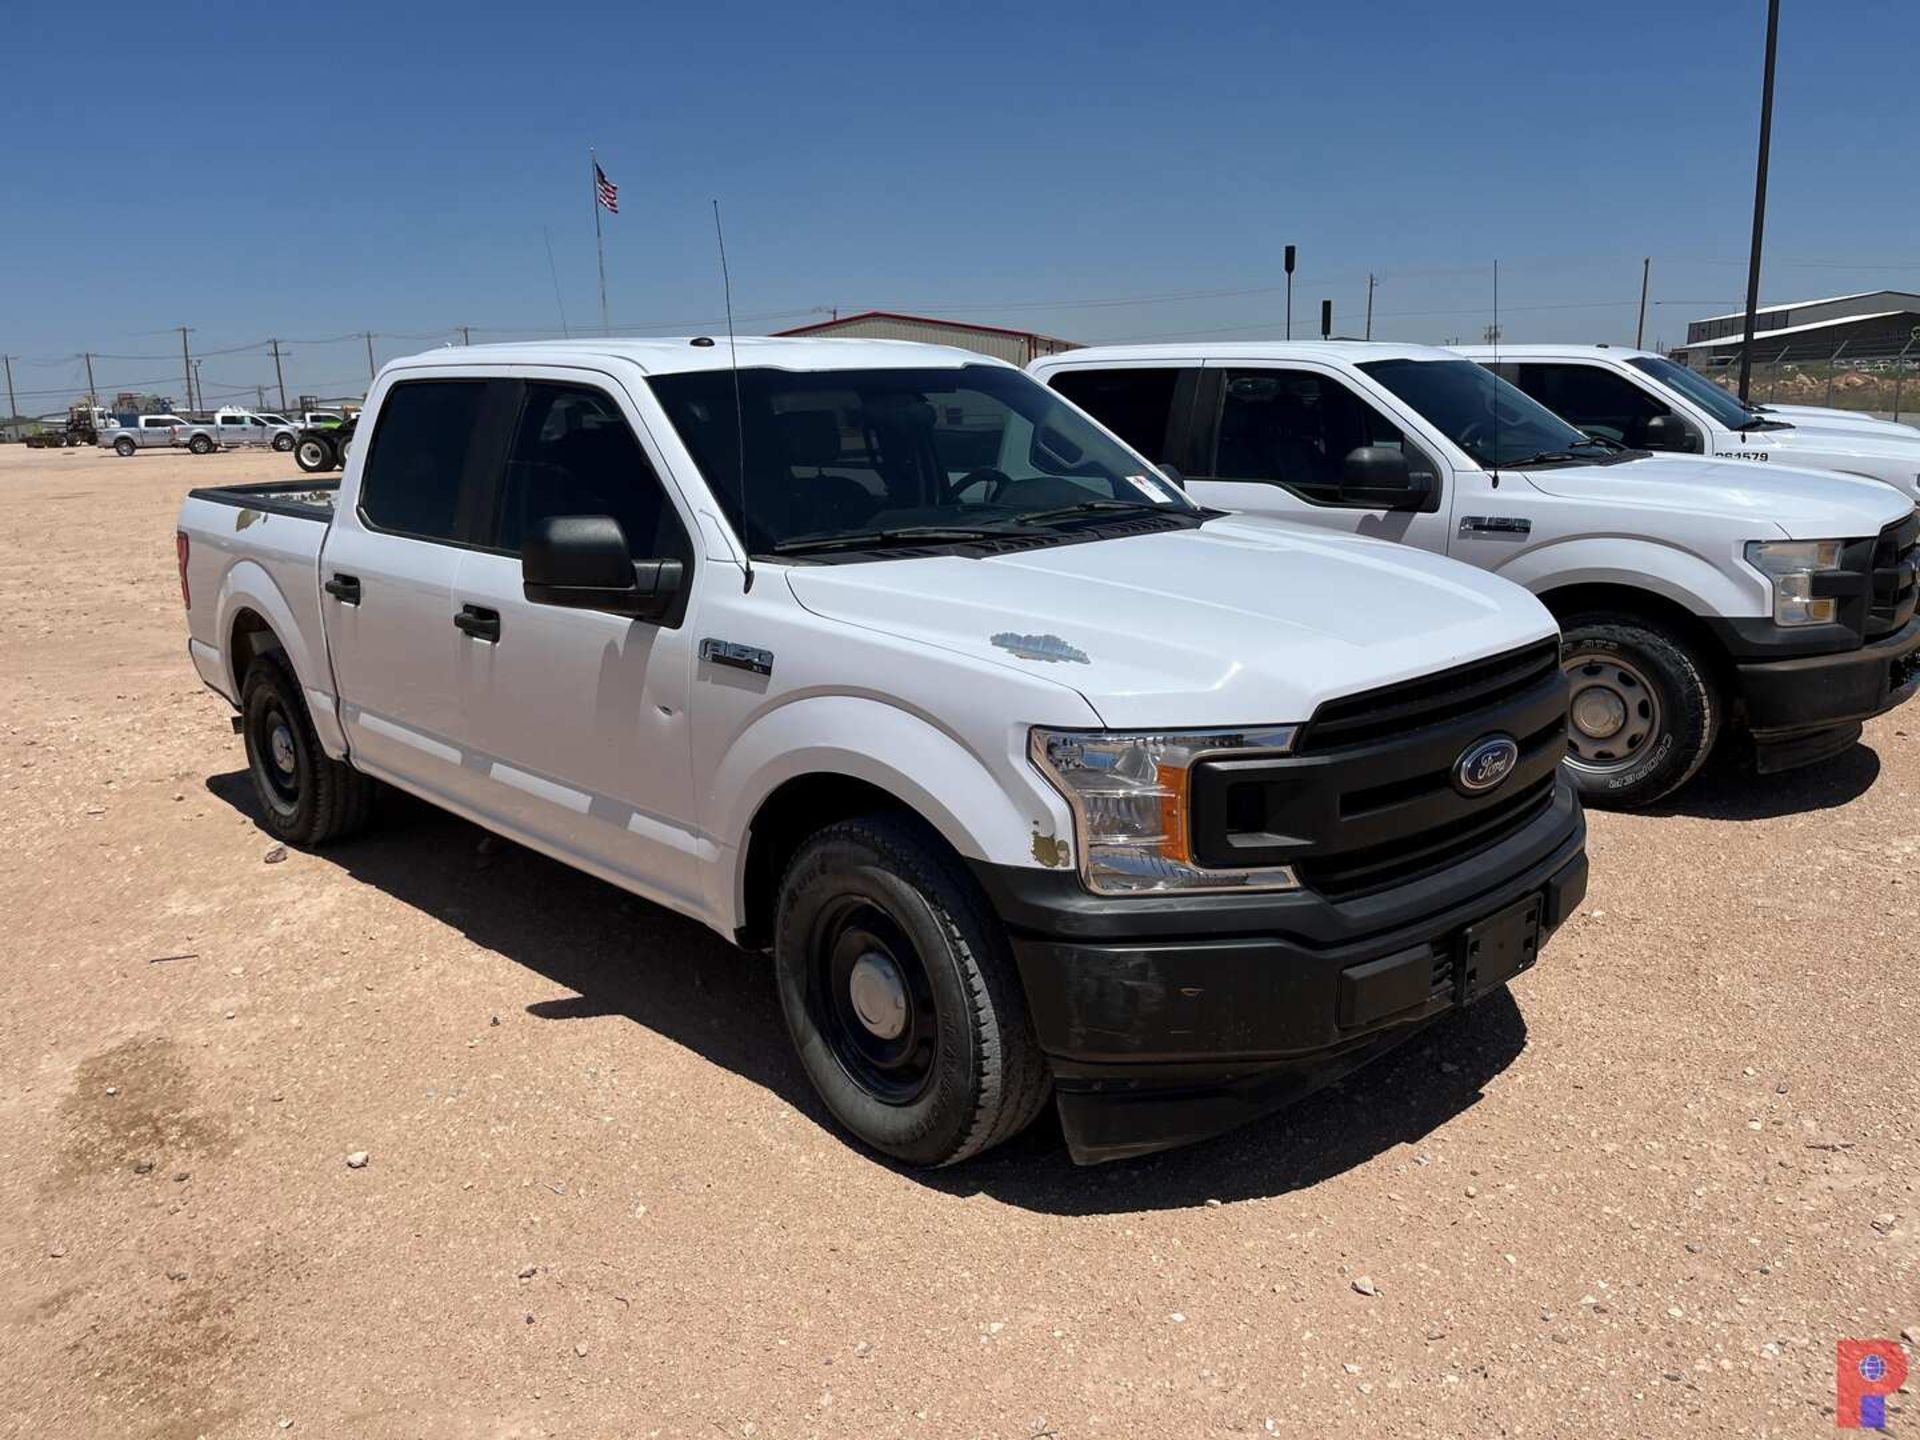 2018 FORD F-150 CREW CAB PICKUP TRUCK - Image 2 of 7